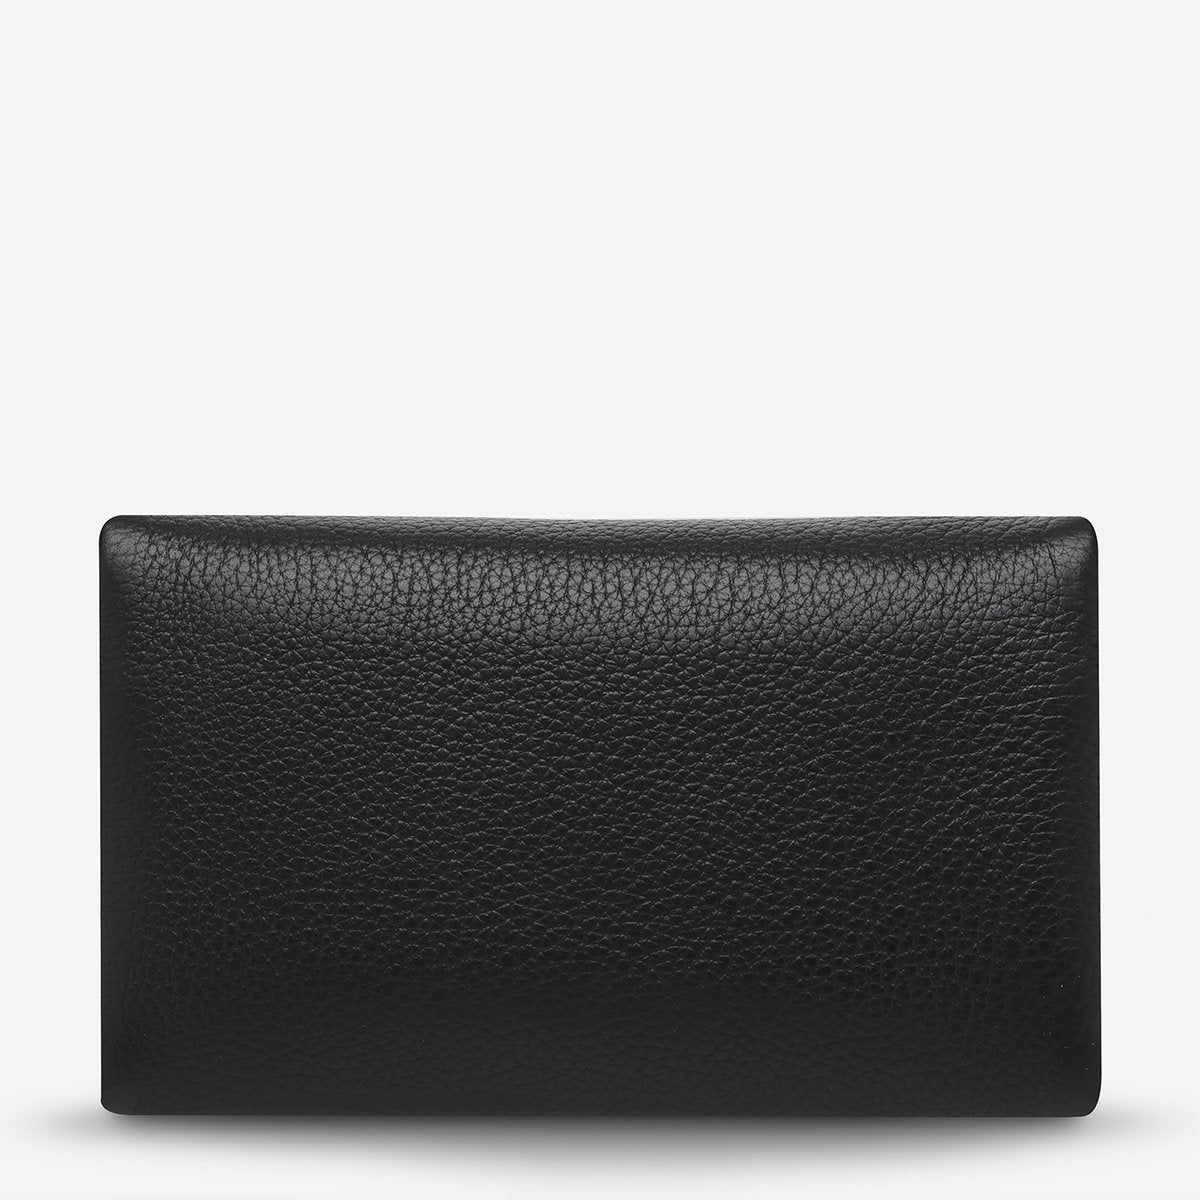 Status Anxiety Audrey Wallet in Black Pebble Back